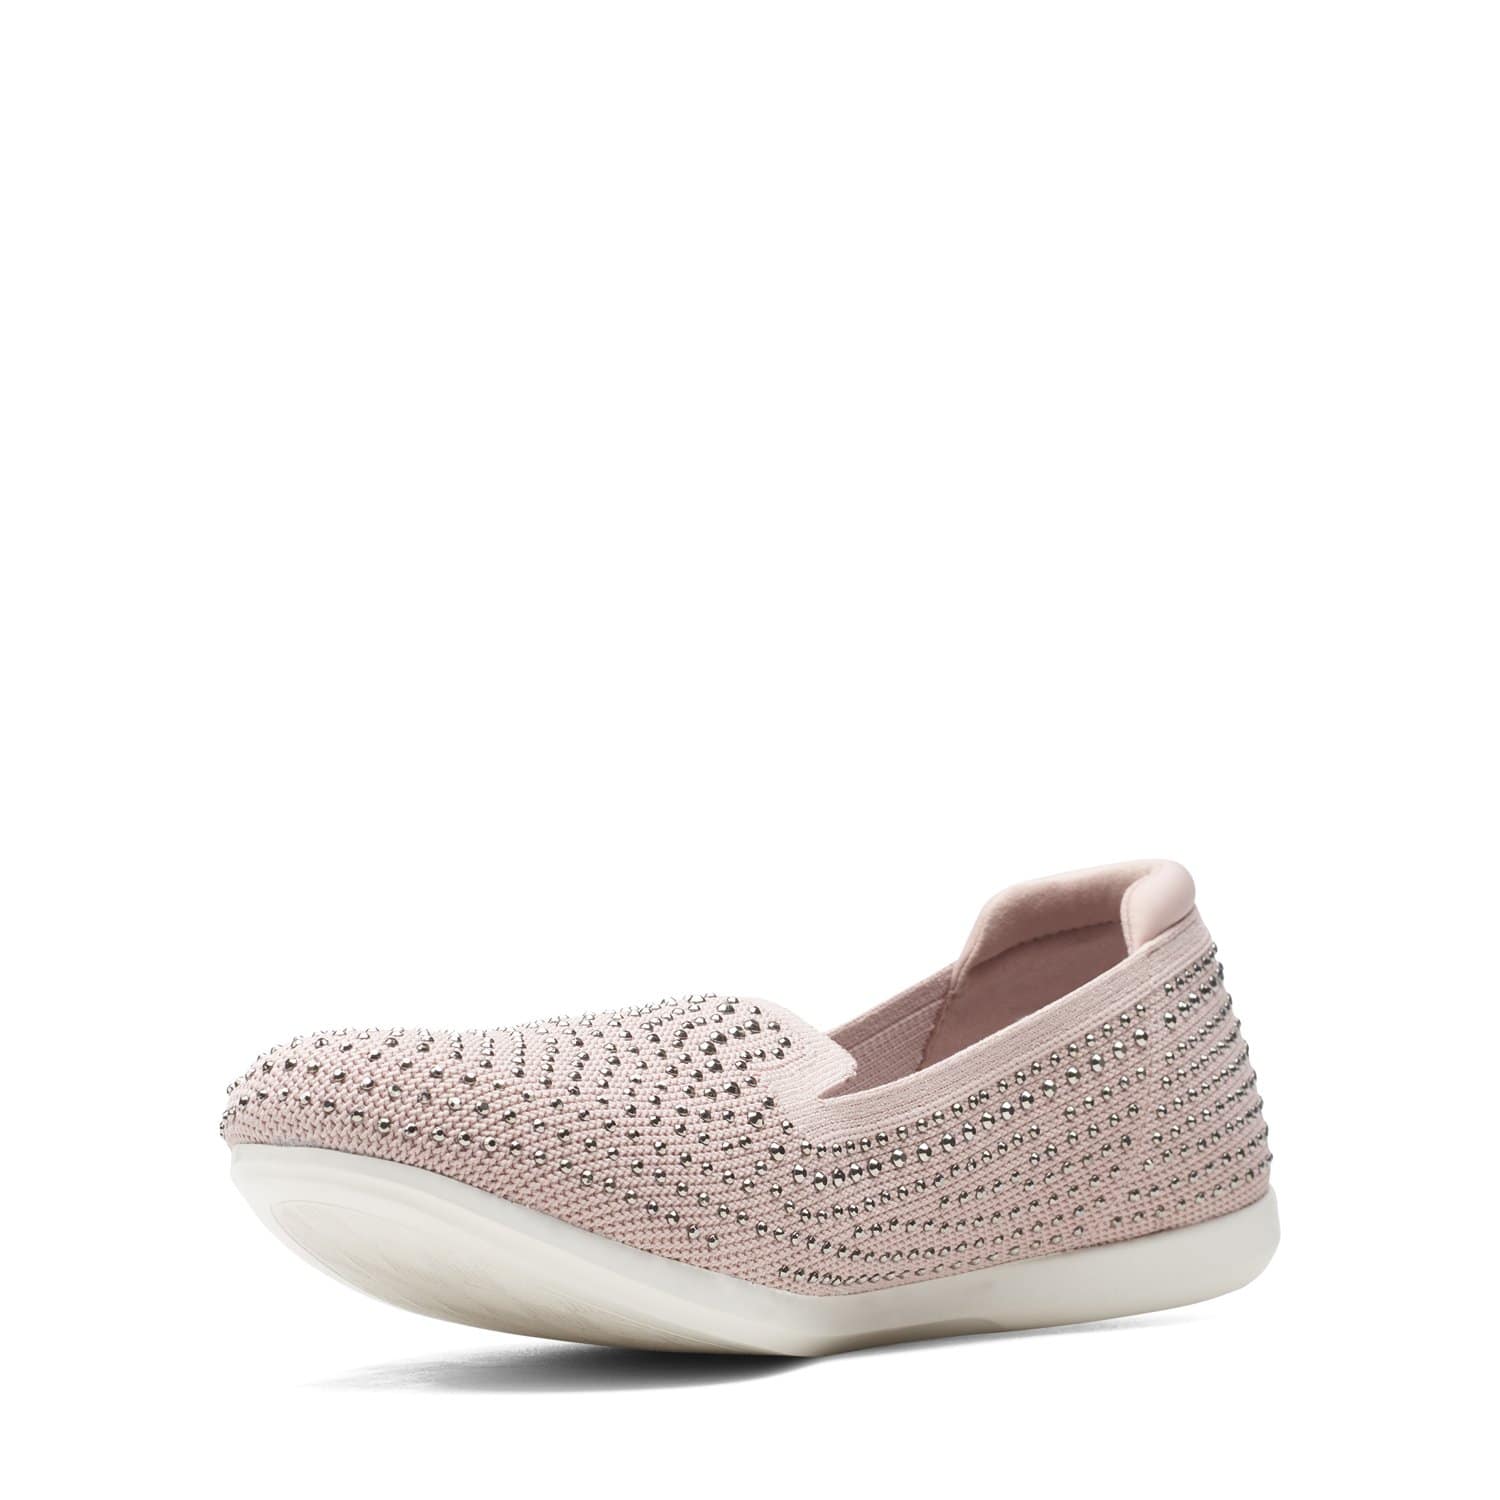 Clarks Carly Dream - Shoes - Dusty Pink - 261586074 - D Width (Standard Fit)